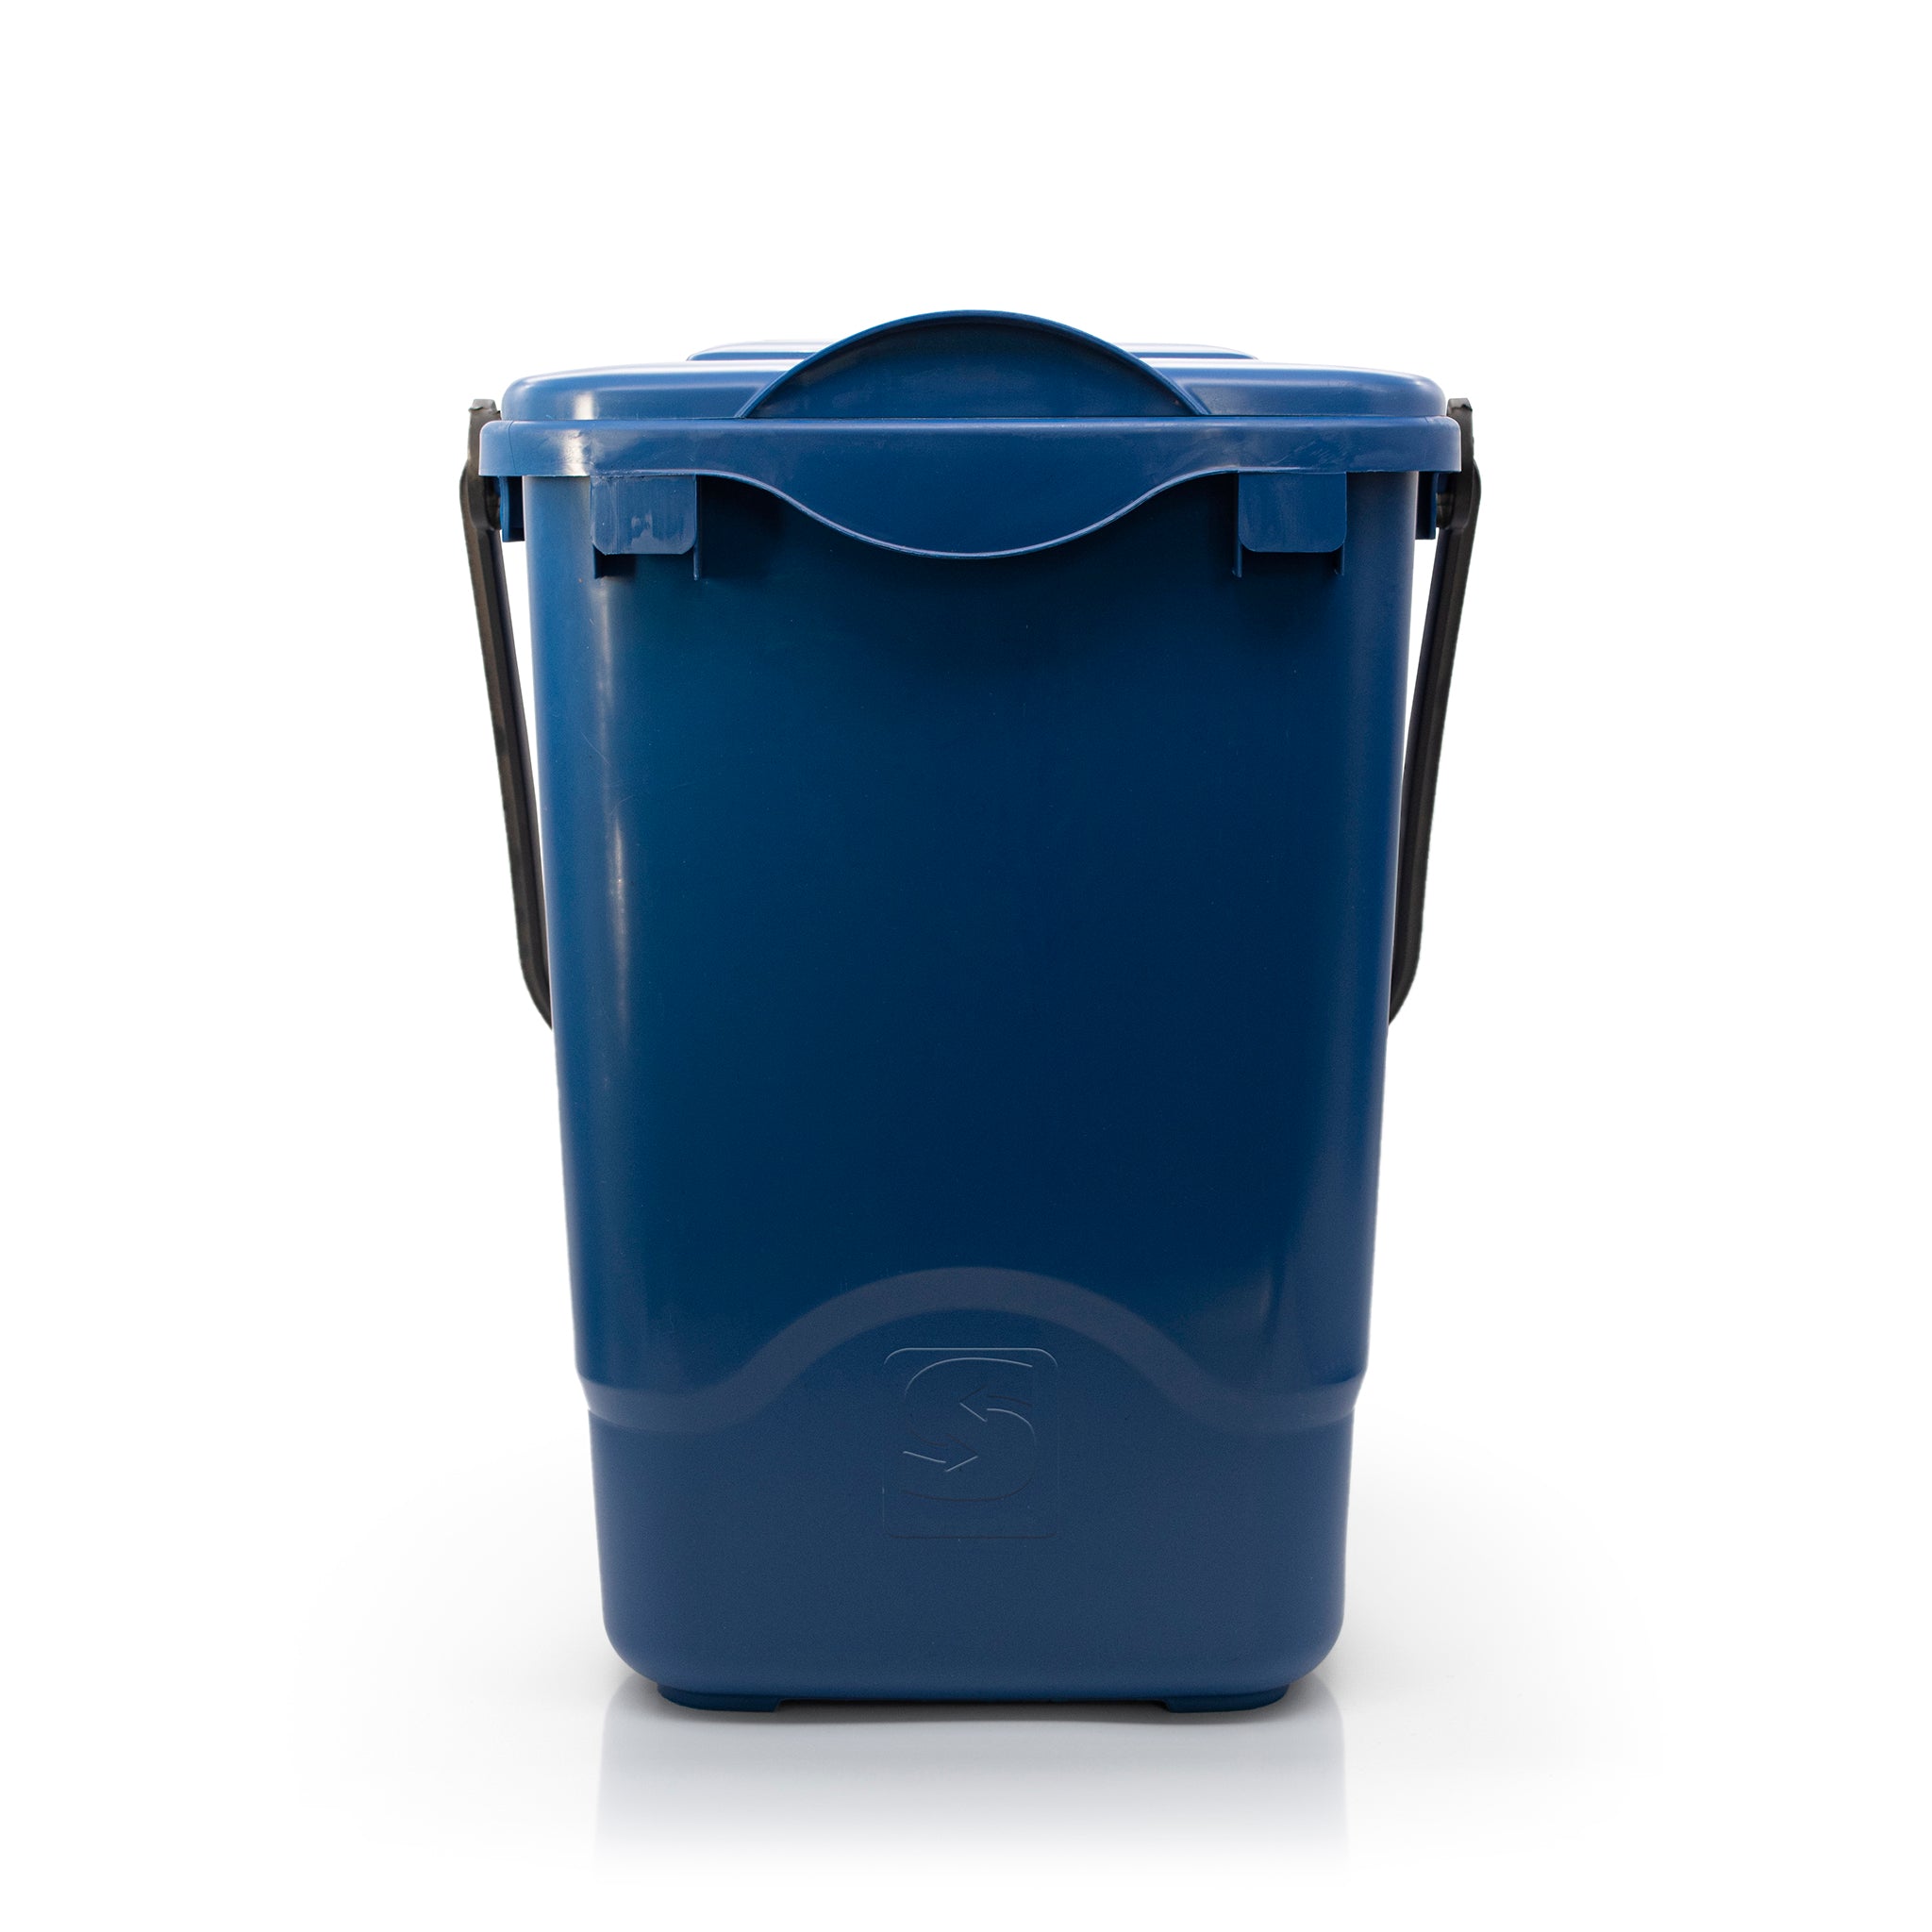 Front view of small blue compost bin